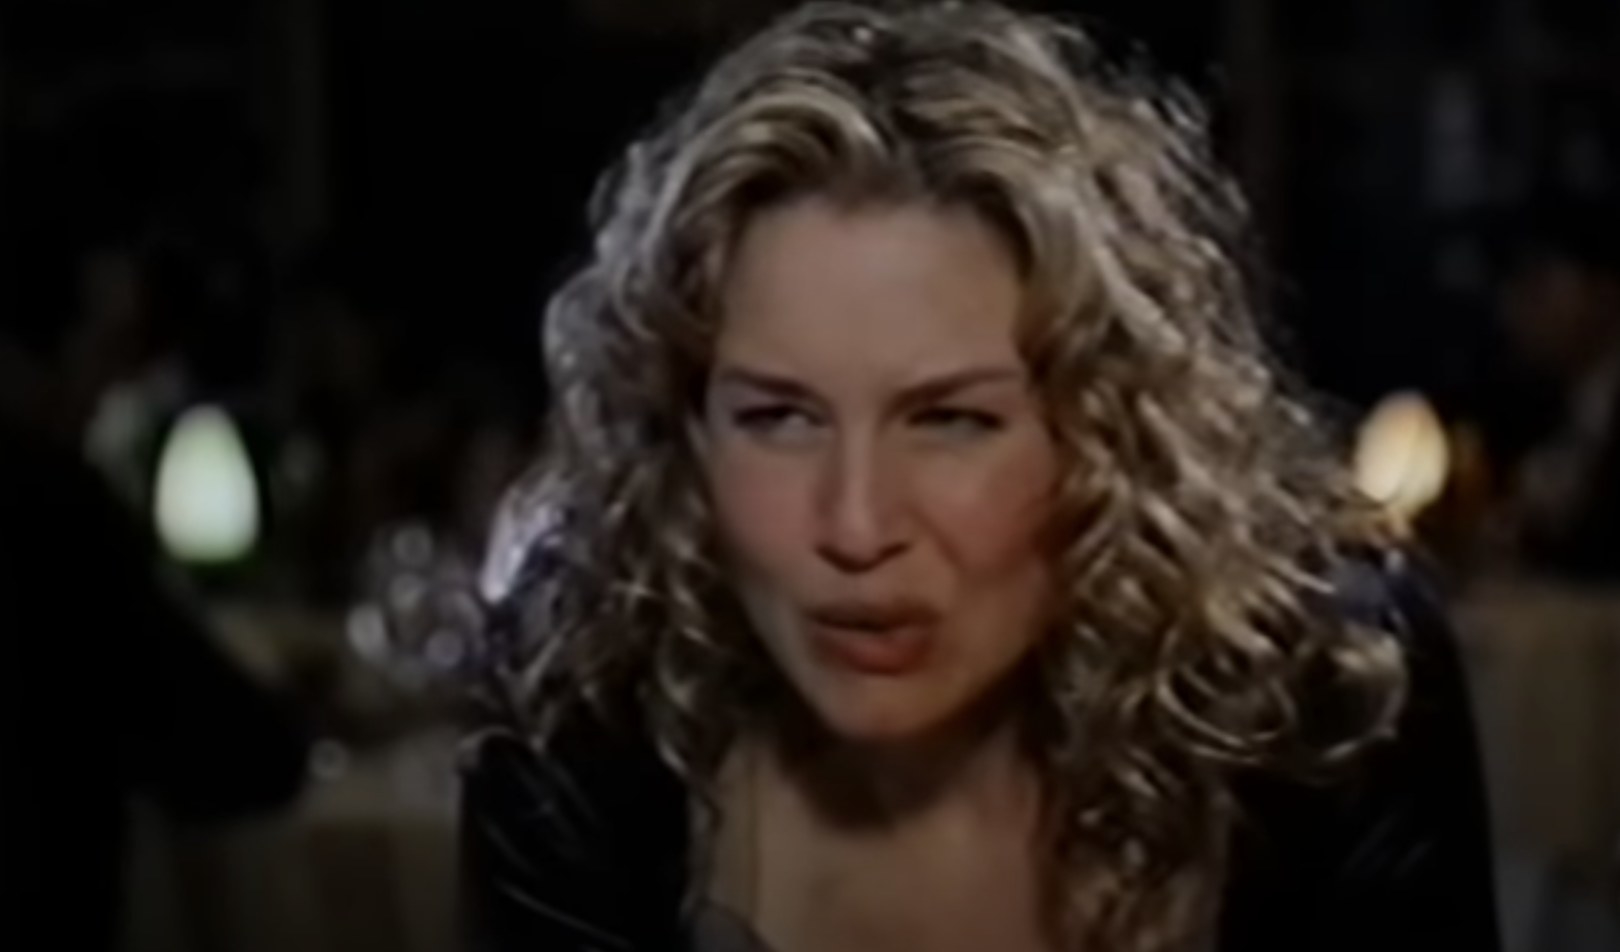 Renée Zellweger has curly blonde hair and she looks at someone off-screen.